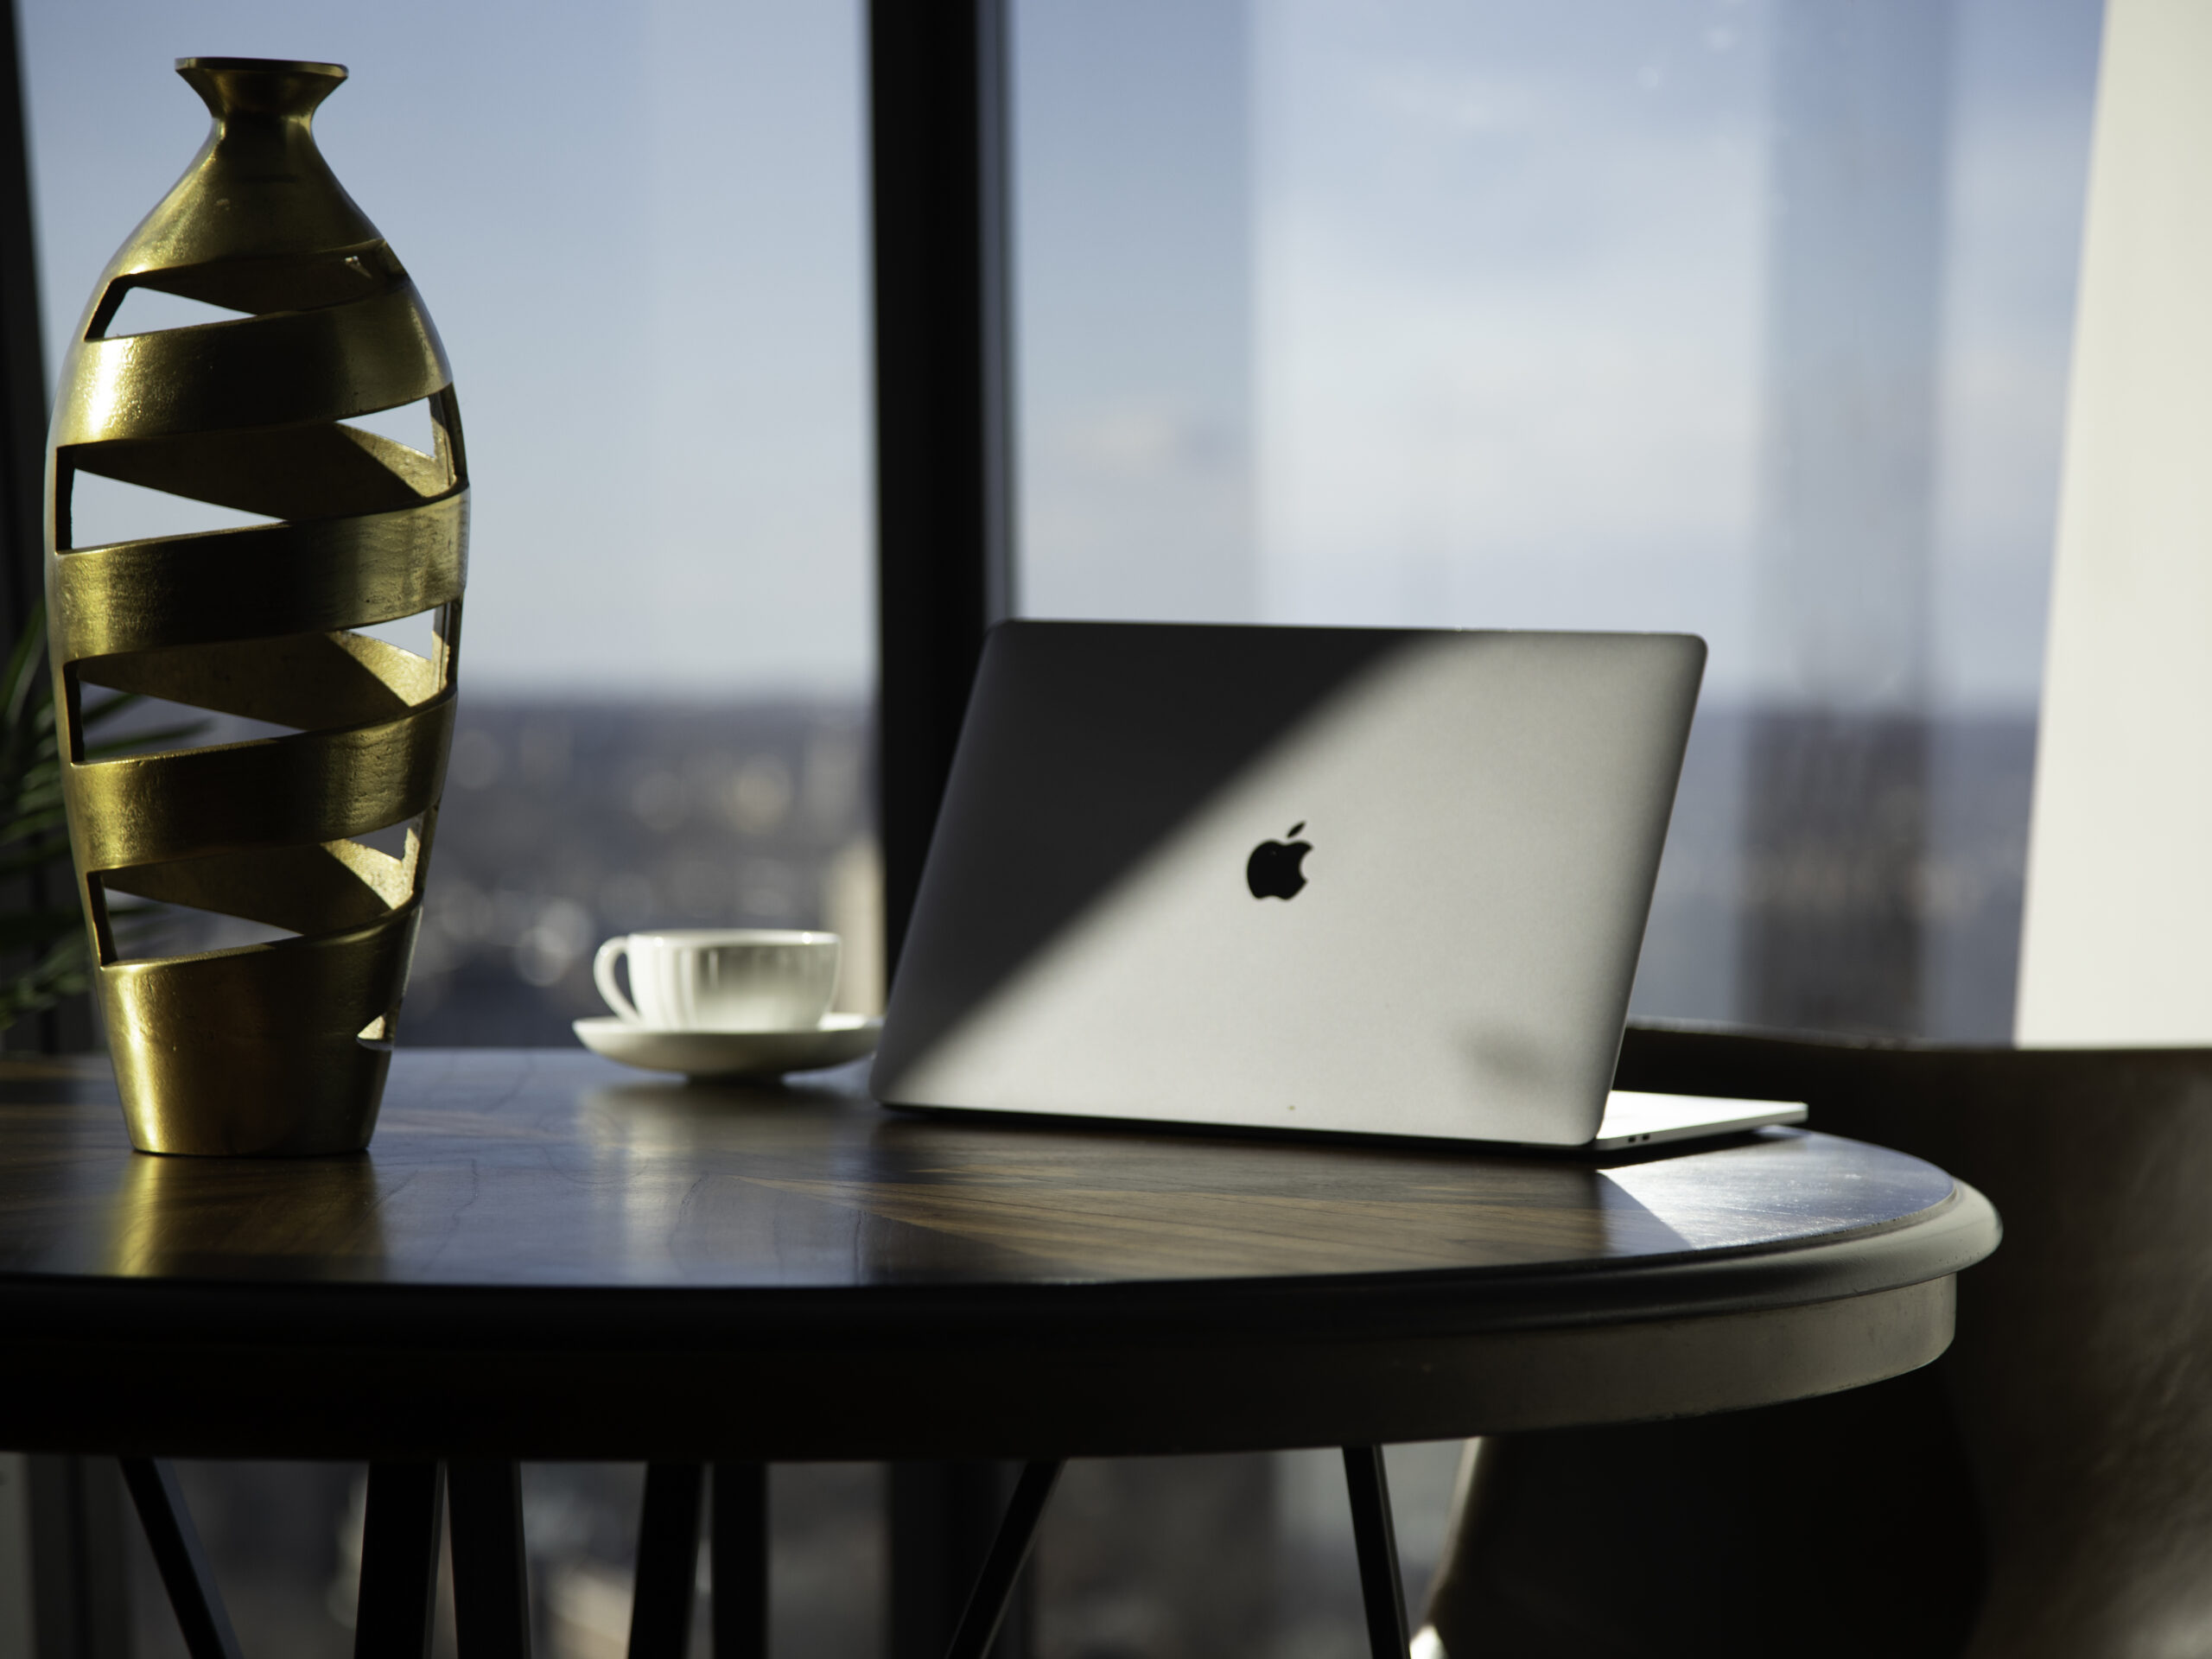 an apple laptop sits on a table next to a decorative gold vase. sunlight makes a beam across the back of the laptop. a coffee cup sits next to the laptop on the table.